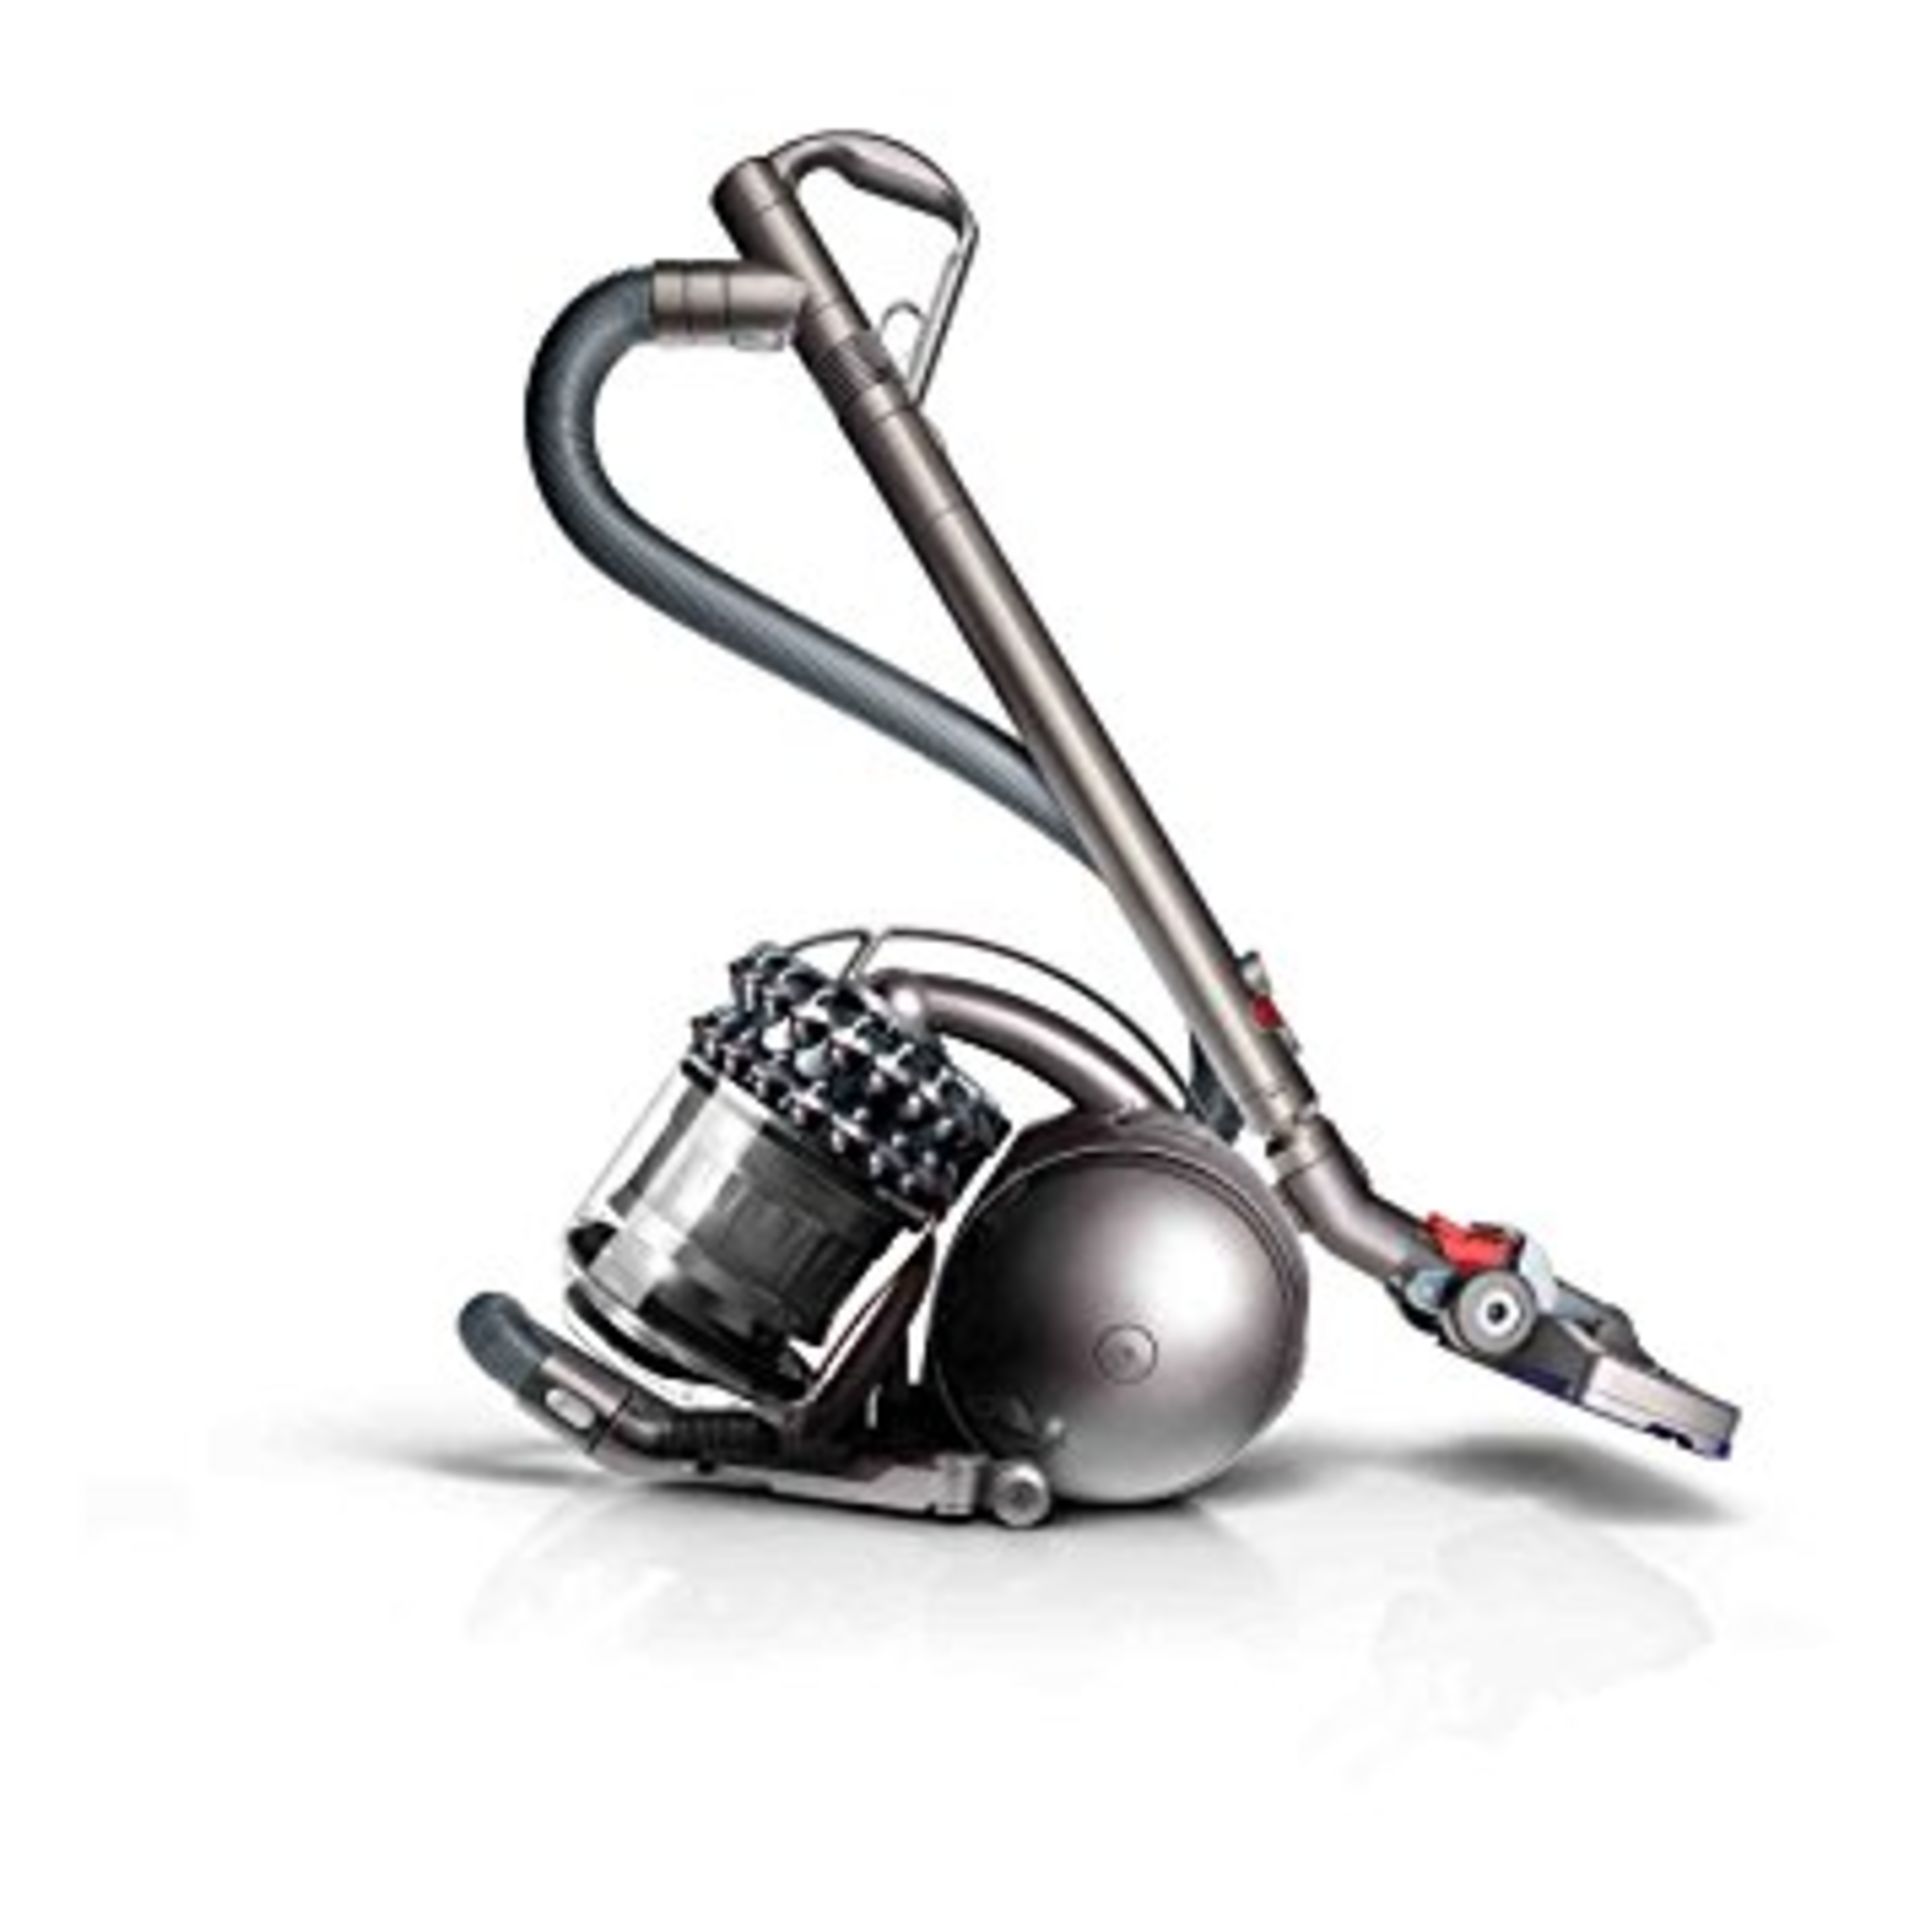 V *TRADE QTY* Brand New Dyson DC54 Animal Extra Cylinder Bagless Vacuum Cleaner with Efficient